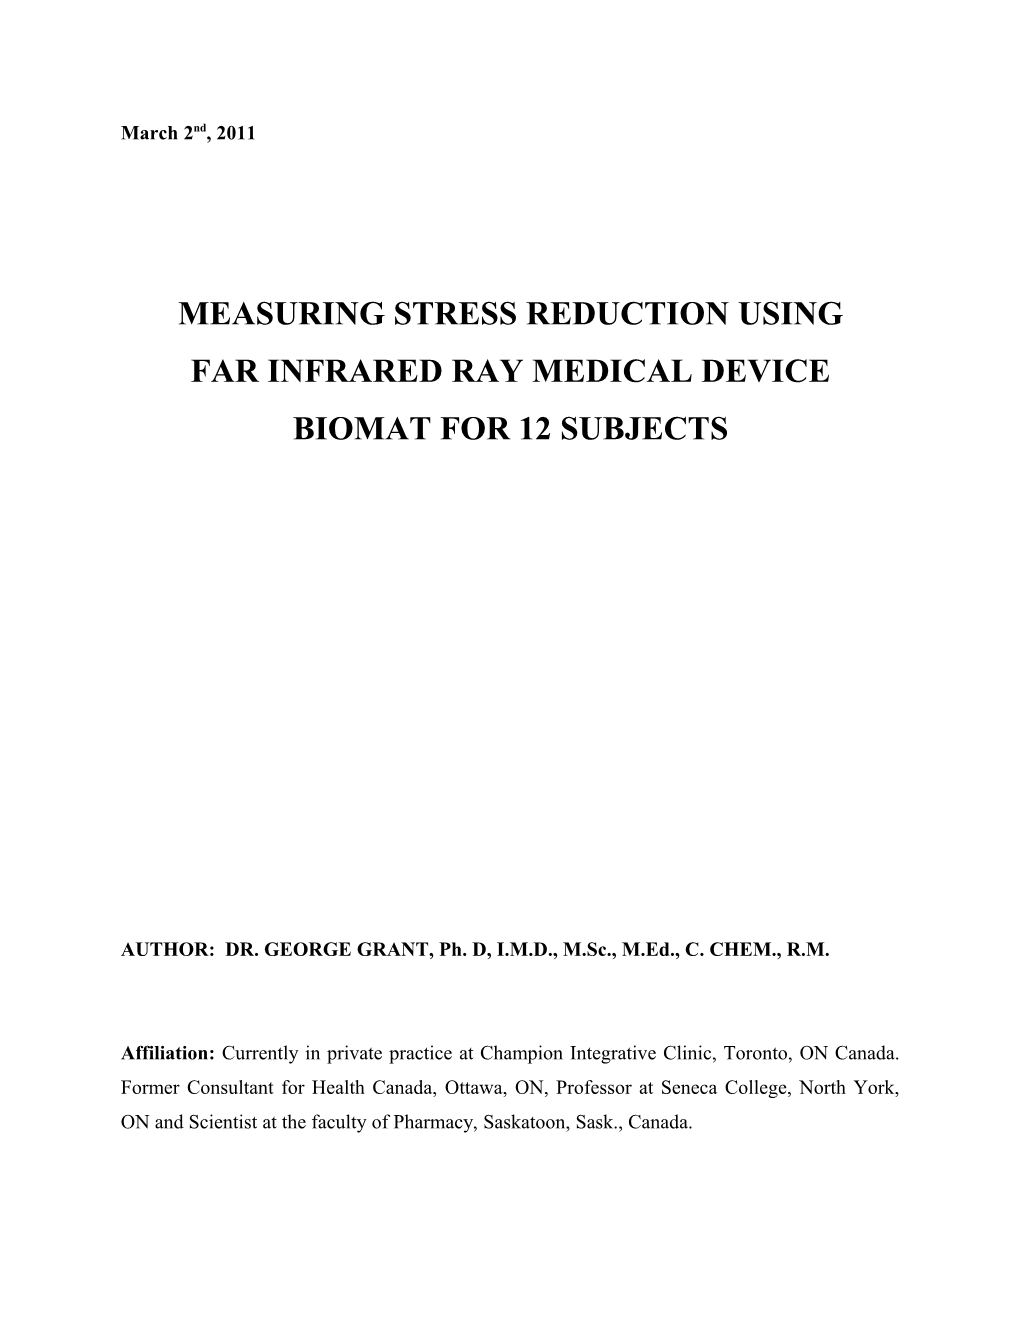 Far Infrared Ray Medical Device Biomat for 12 Subjects